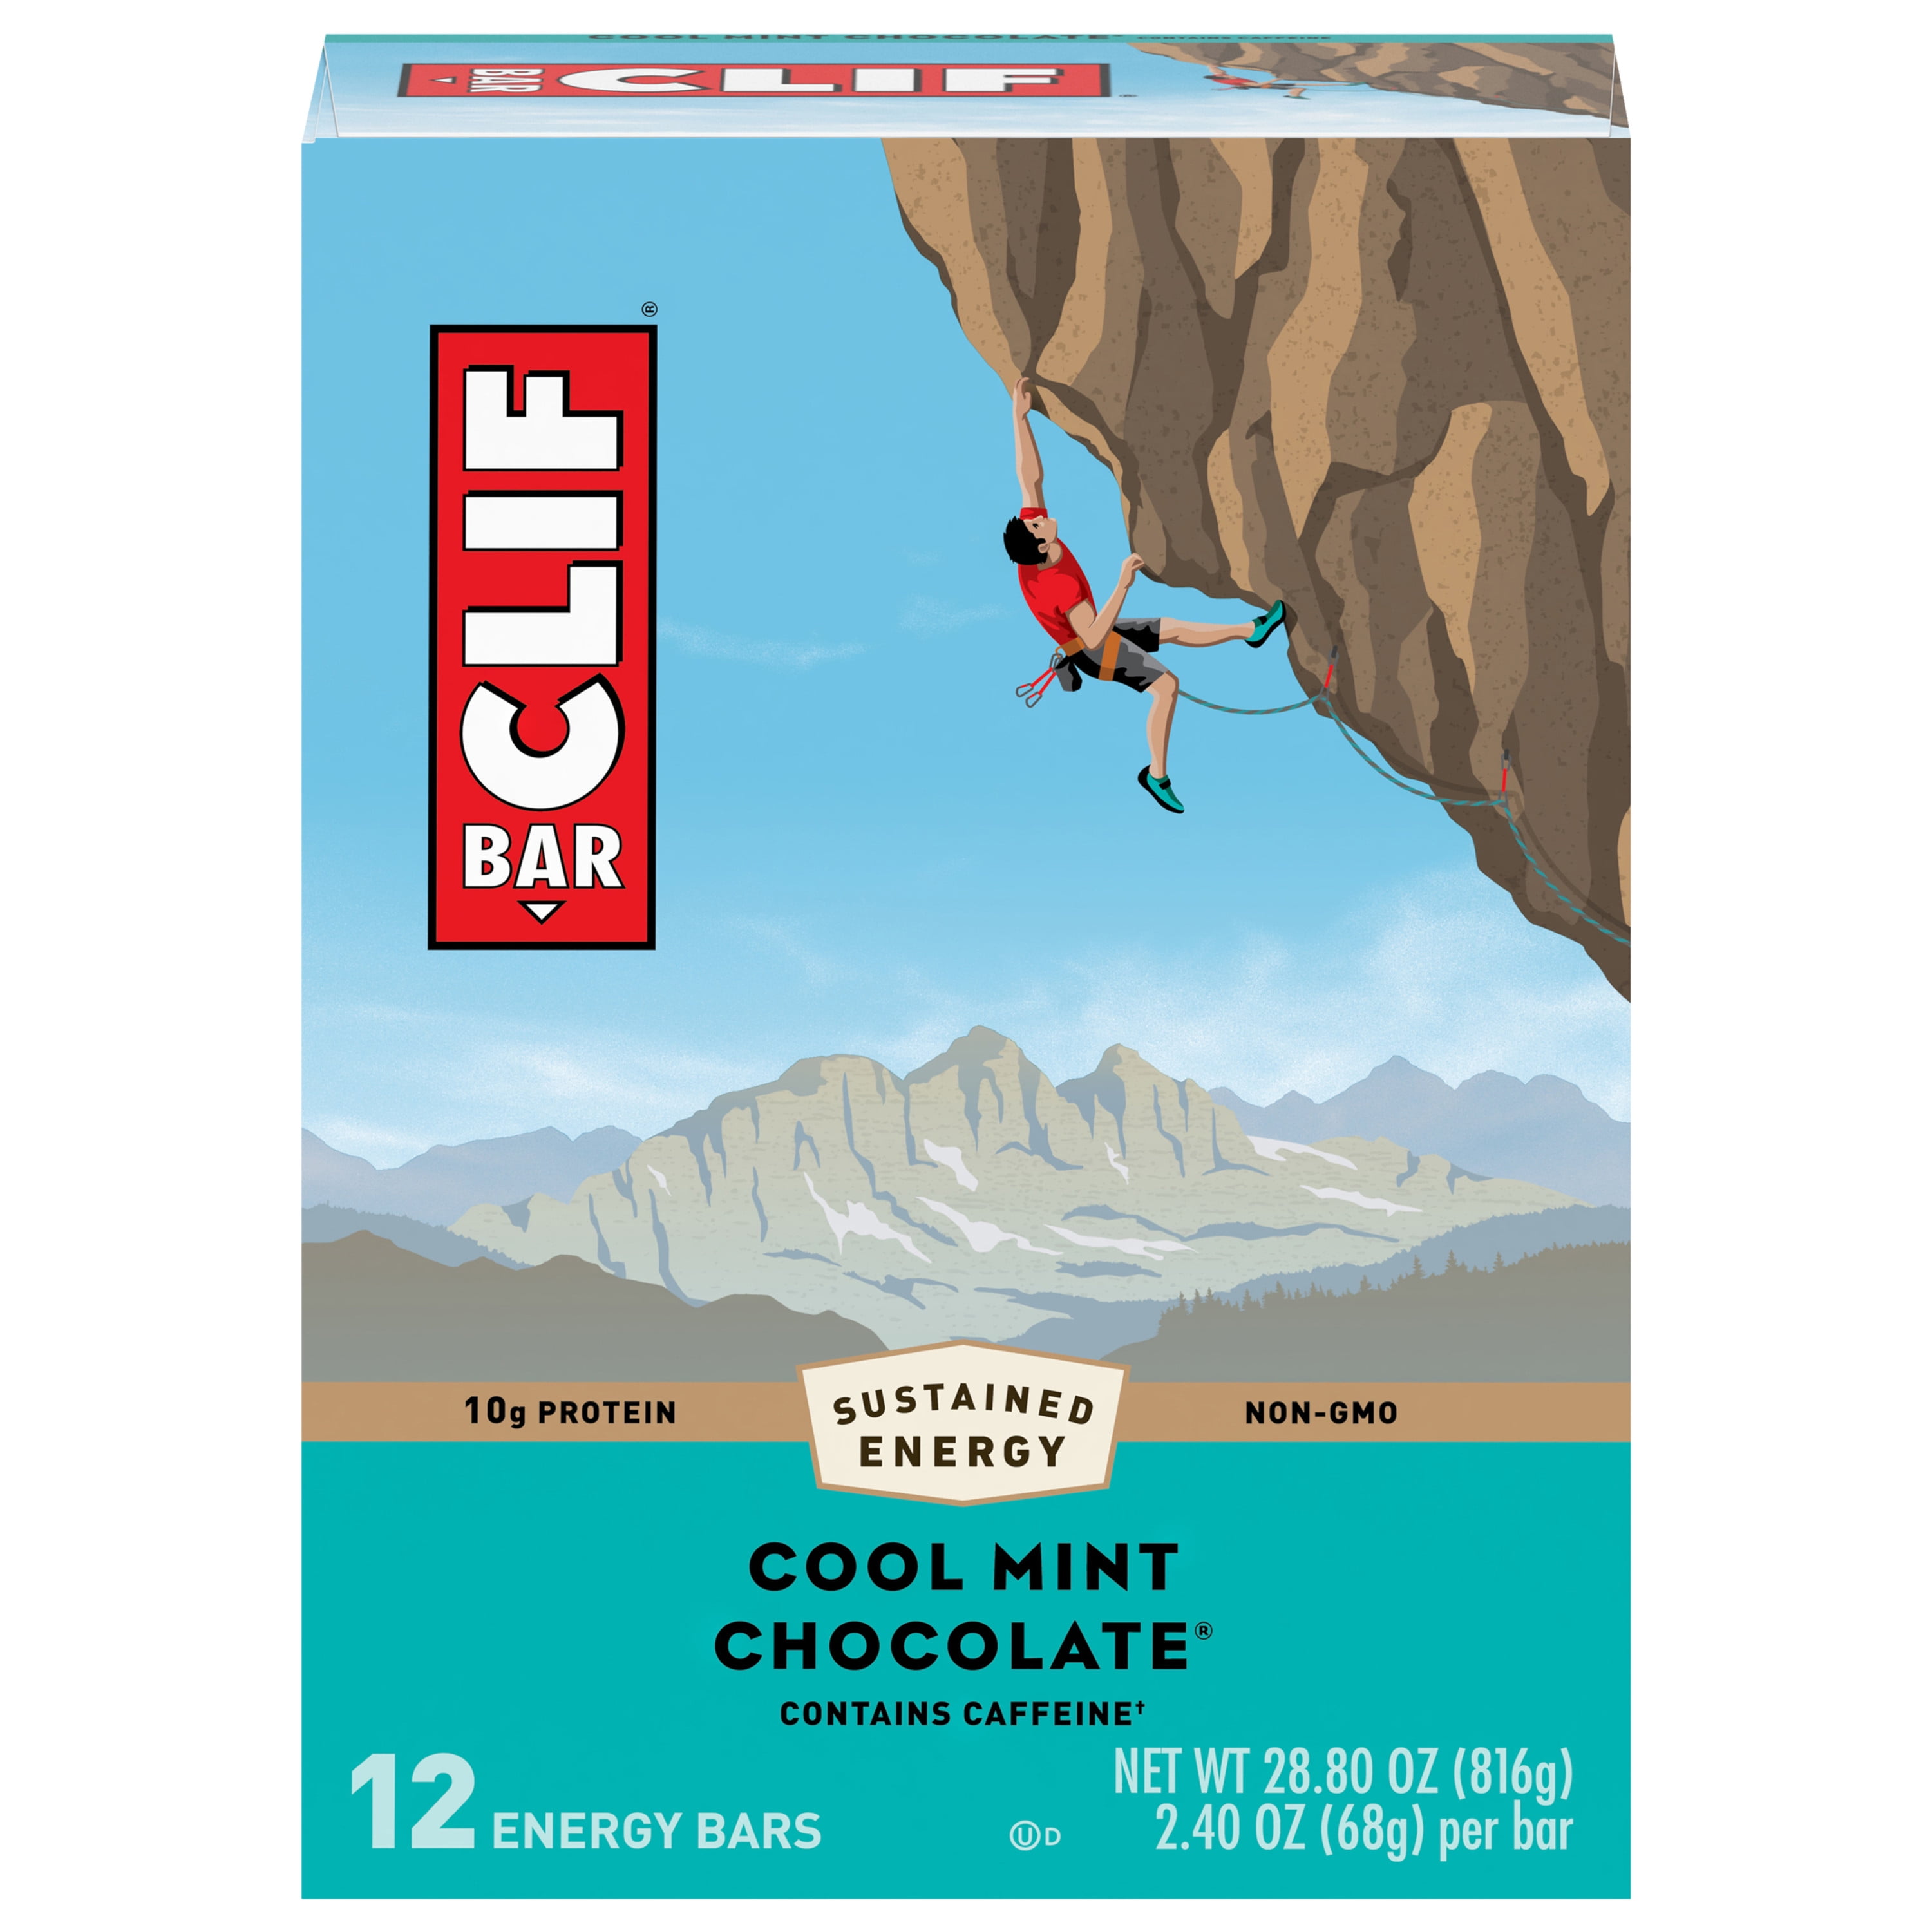 CLIF BAR Energy Bars, Cool Mint Chocolate, 10g Protein Bar, 12 Ct, 2.4 oz (Packaging May Vary)